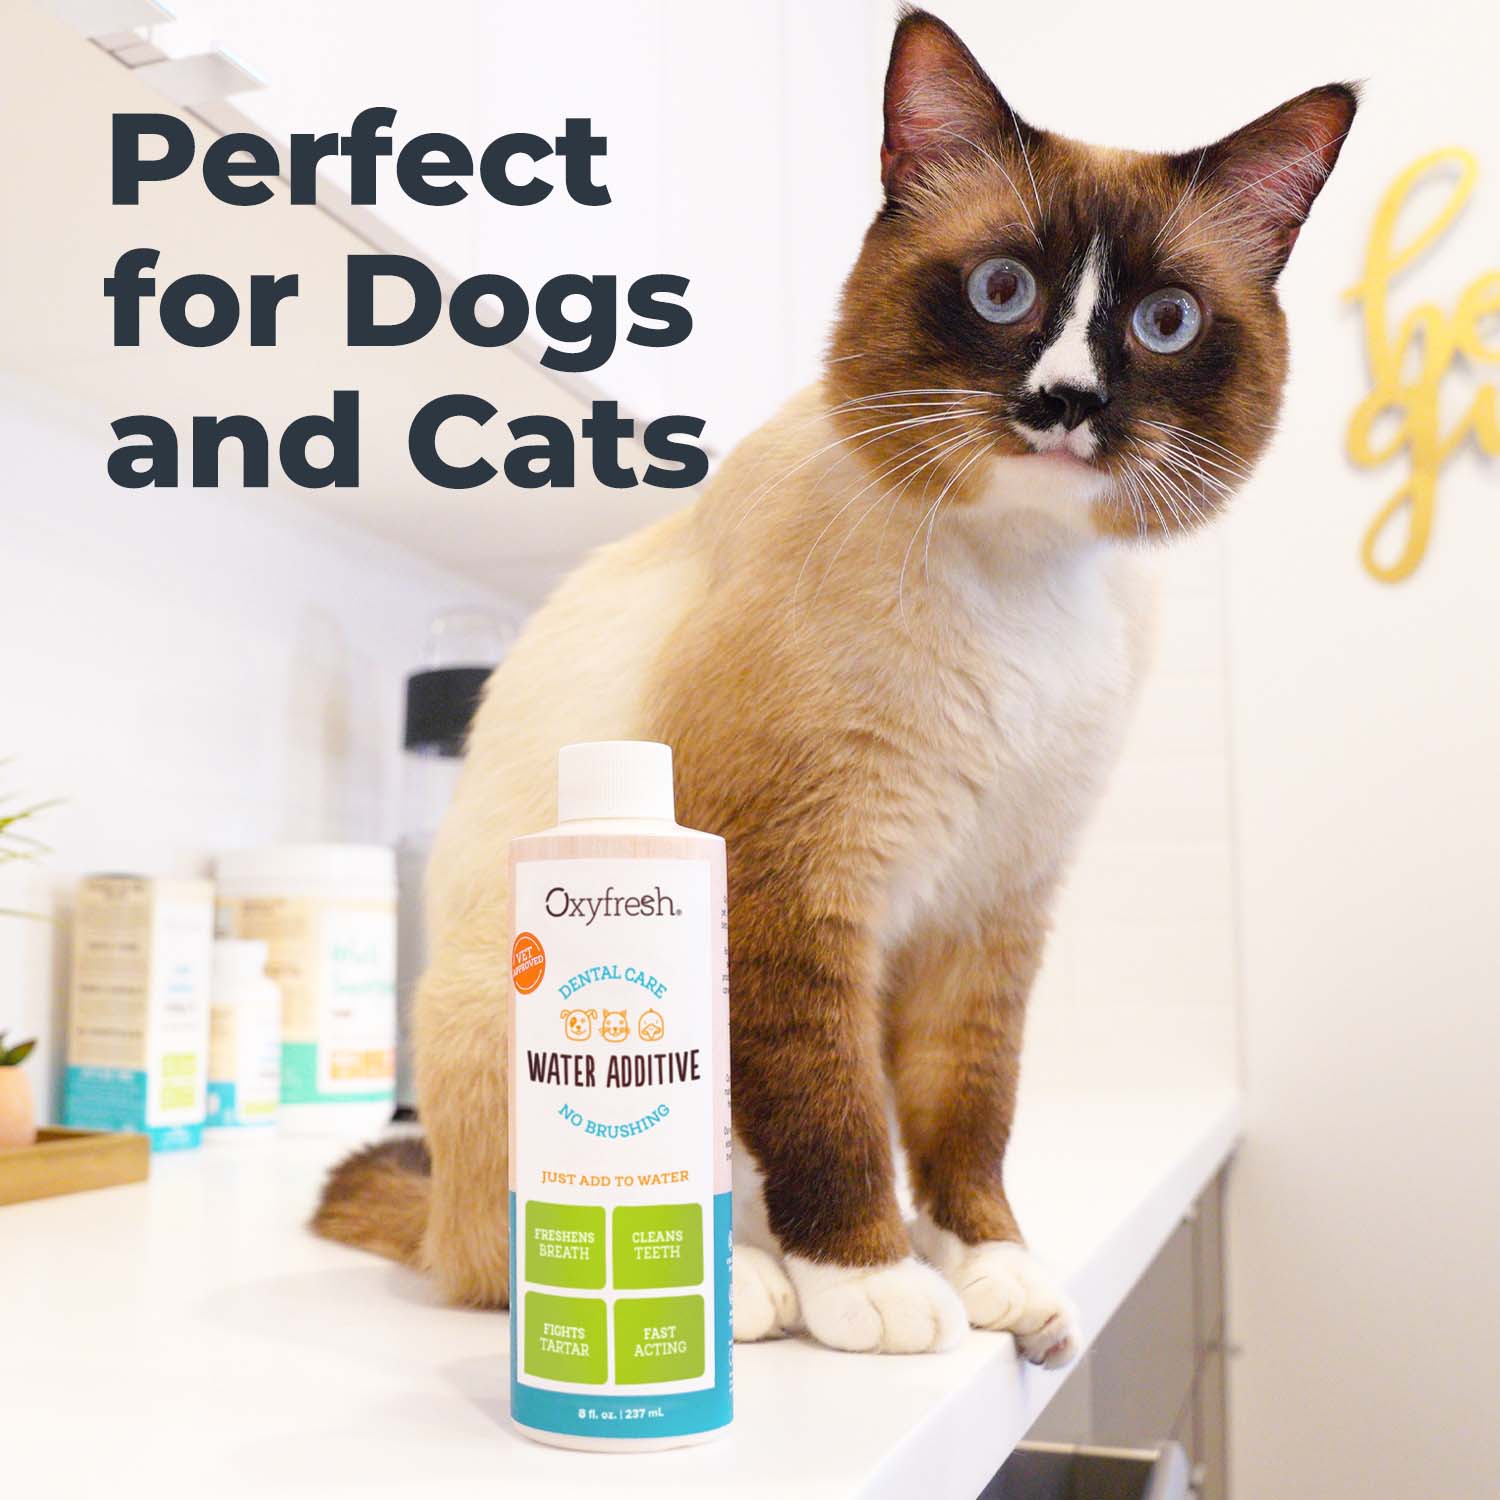 oxyfresh cat water additive perfect for cats and dogs curious looking cat sitting on countertop next to bottle